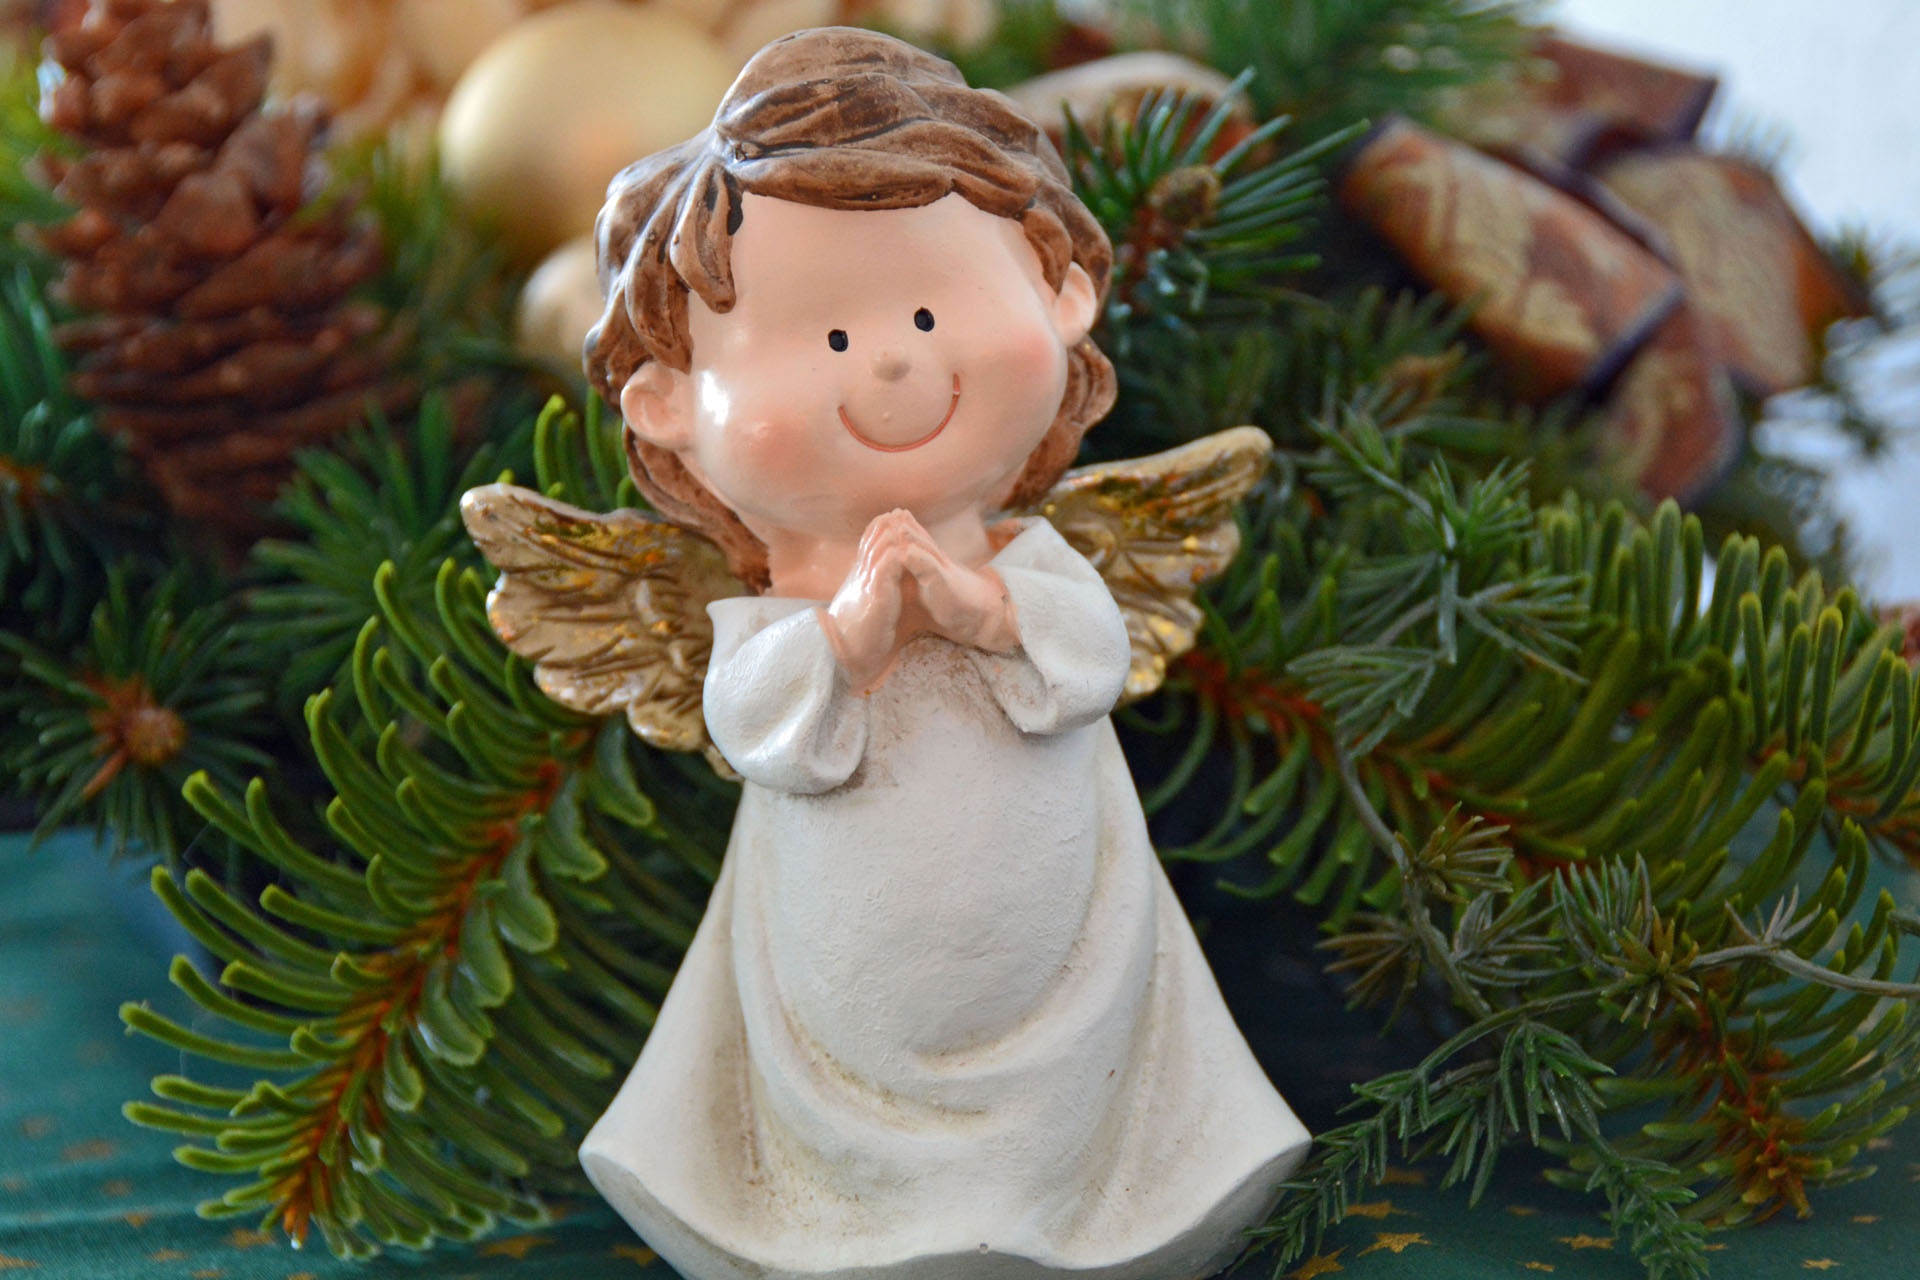 tree-book-wing-flower-decoration-christmas-toy-christmas-tree-smile-christmas-decoration-christmas-angel-holly-angel-figure-faith-greeting-card-satisfaction-harmony-christmas-balls-pine-cones